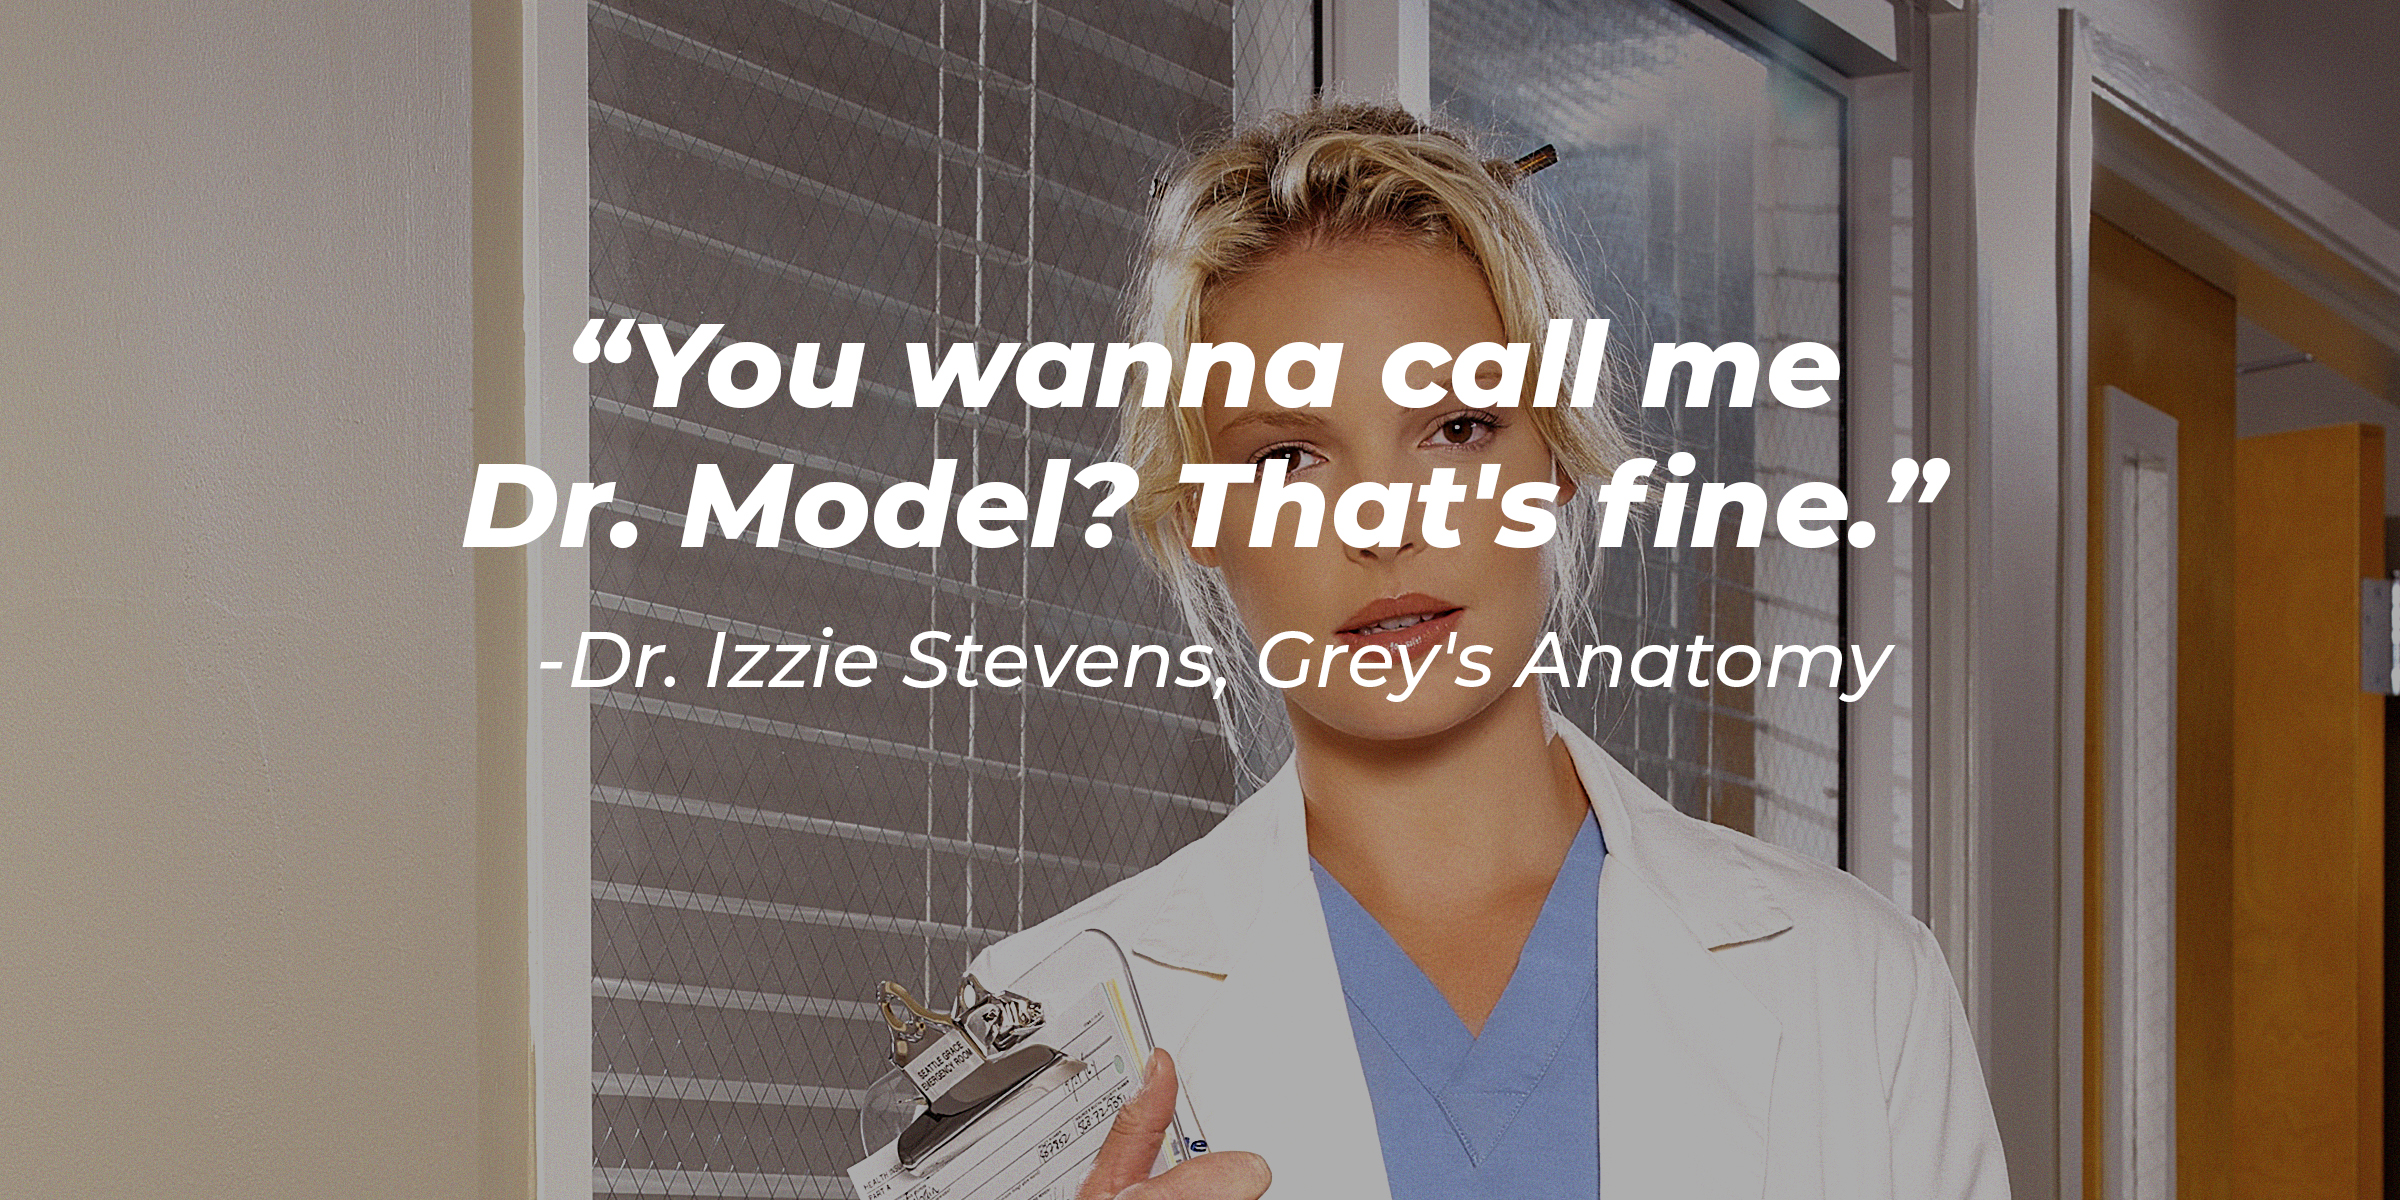 Izzie Stevens's quote: "You wanna call me Dr. Model? That's fine." | Image: Amodays